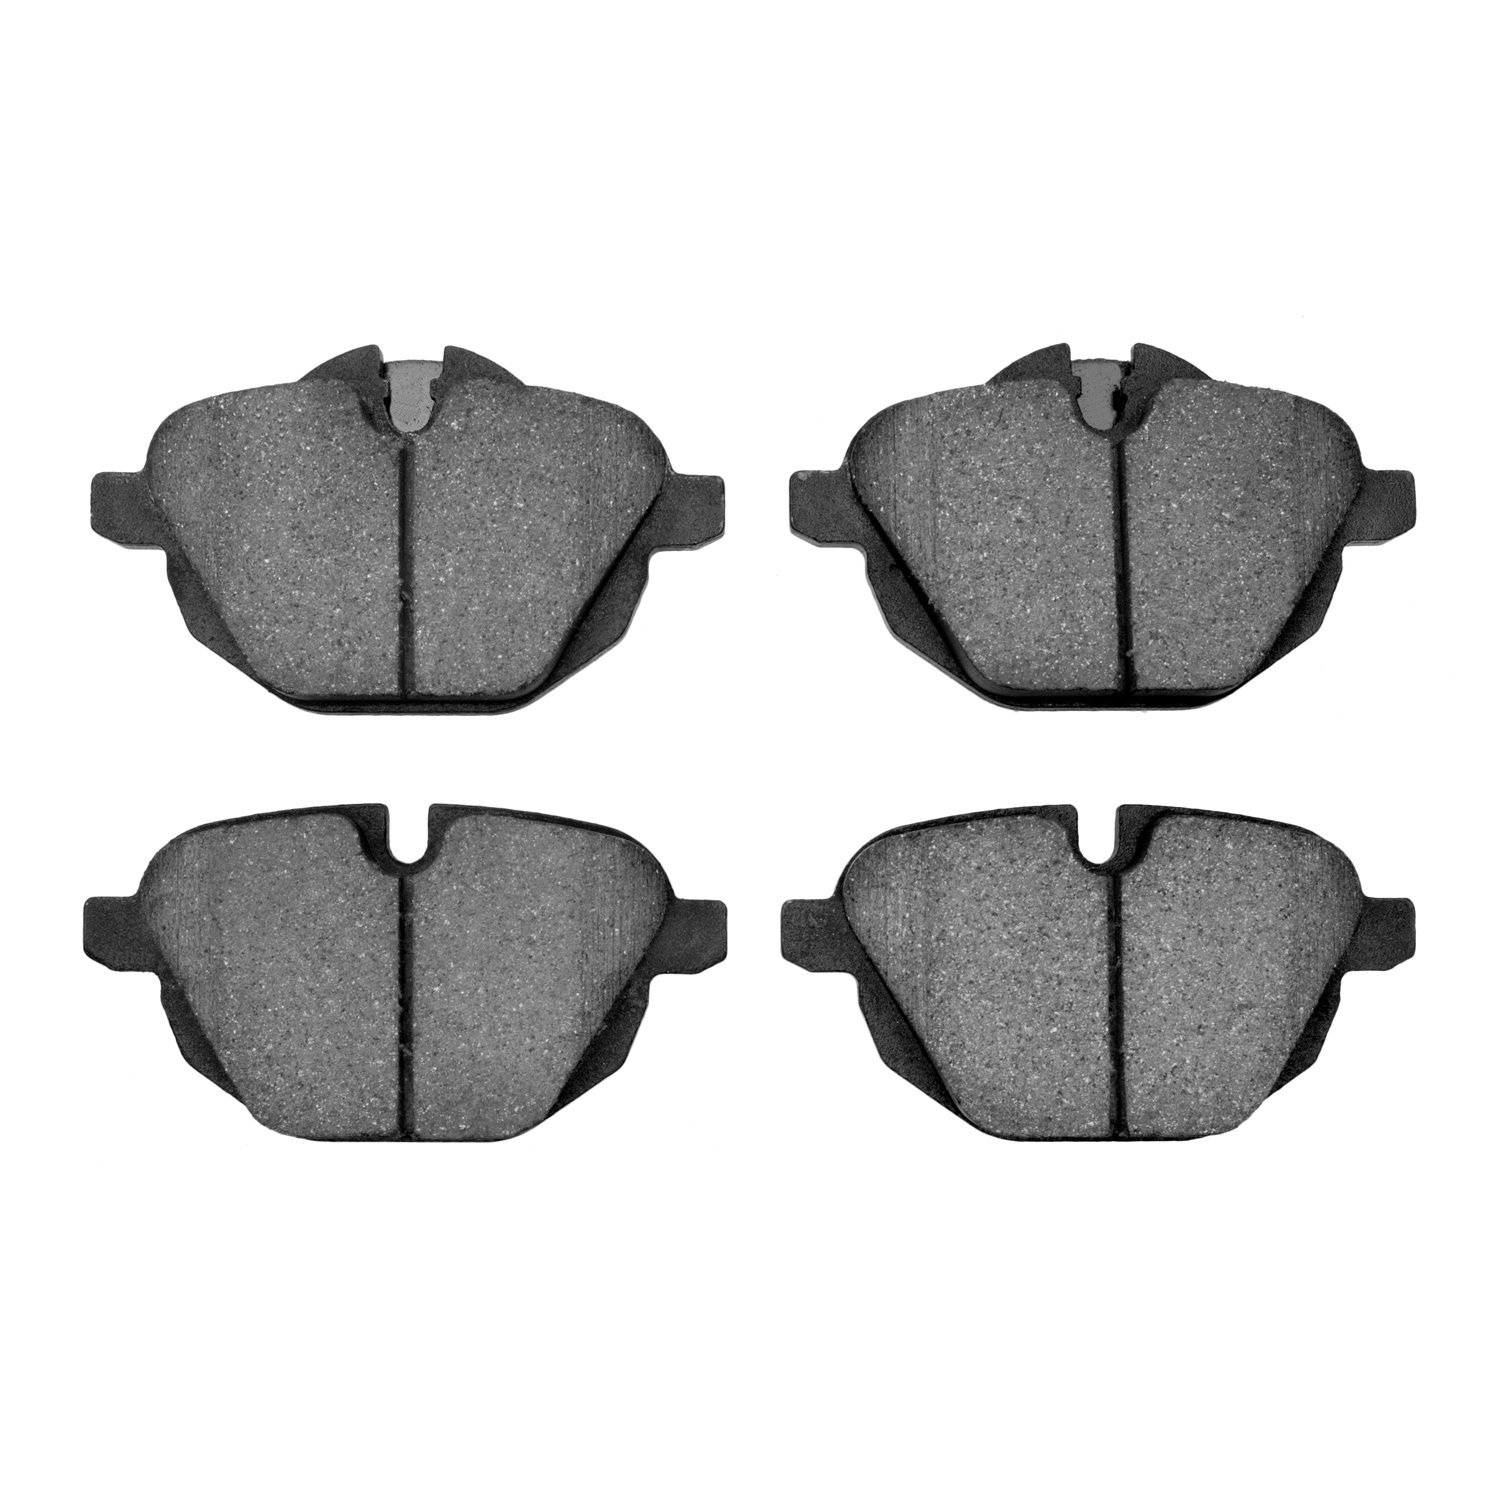 1115-1473-00 Active Performance Low-Metallic Brake Pads, Fits Select BMW, Position: Rear